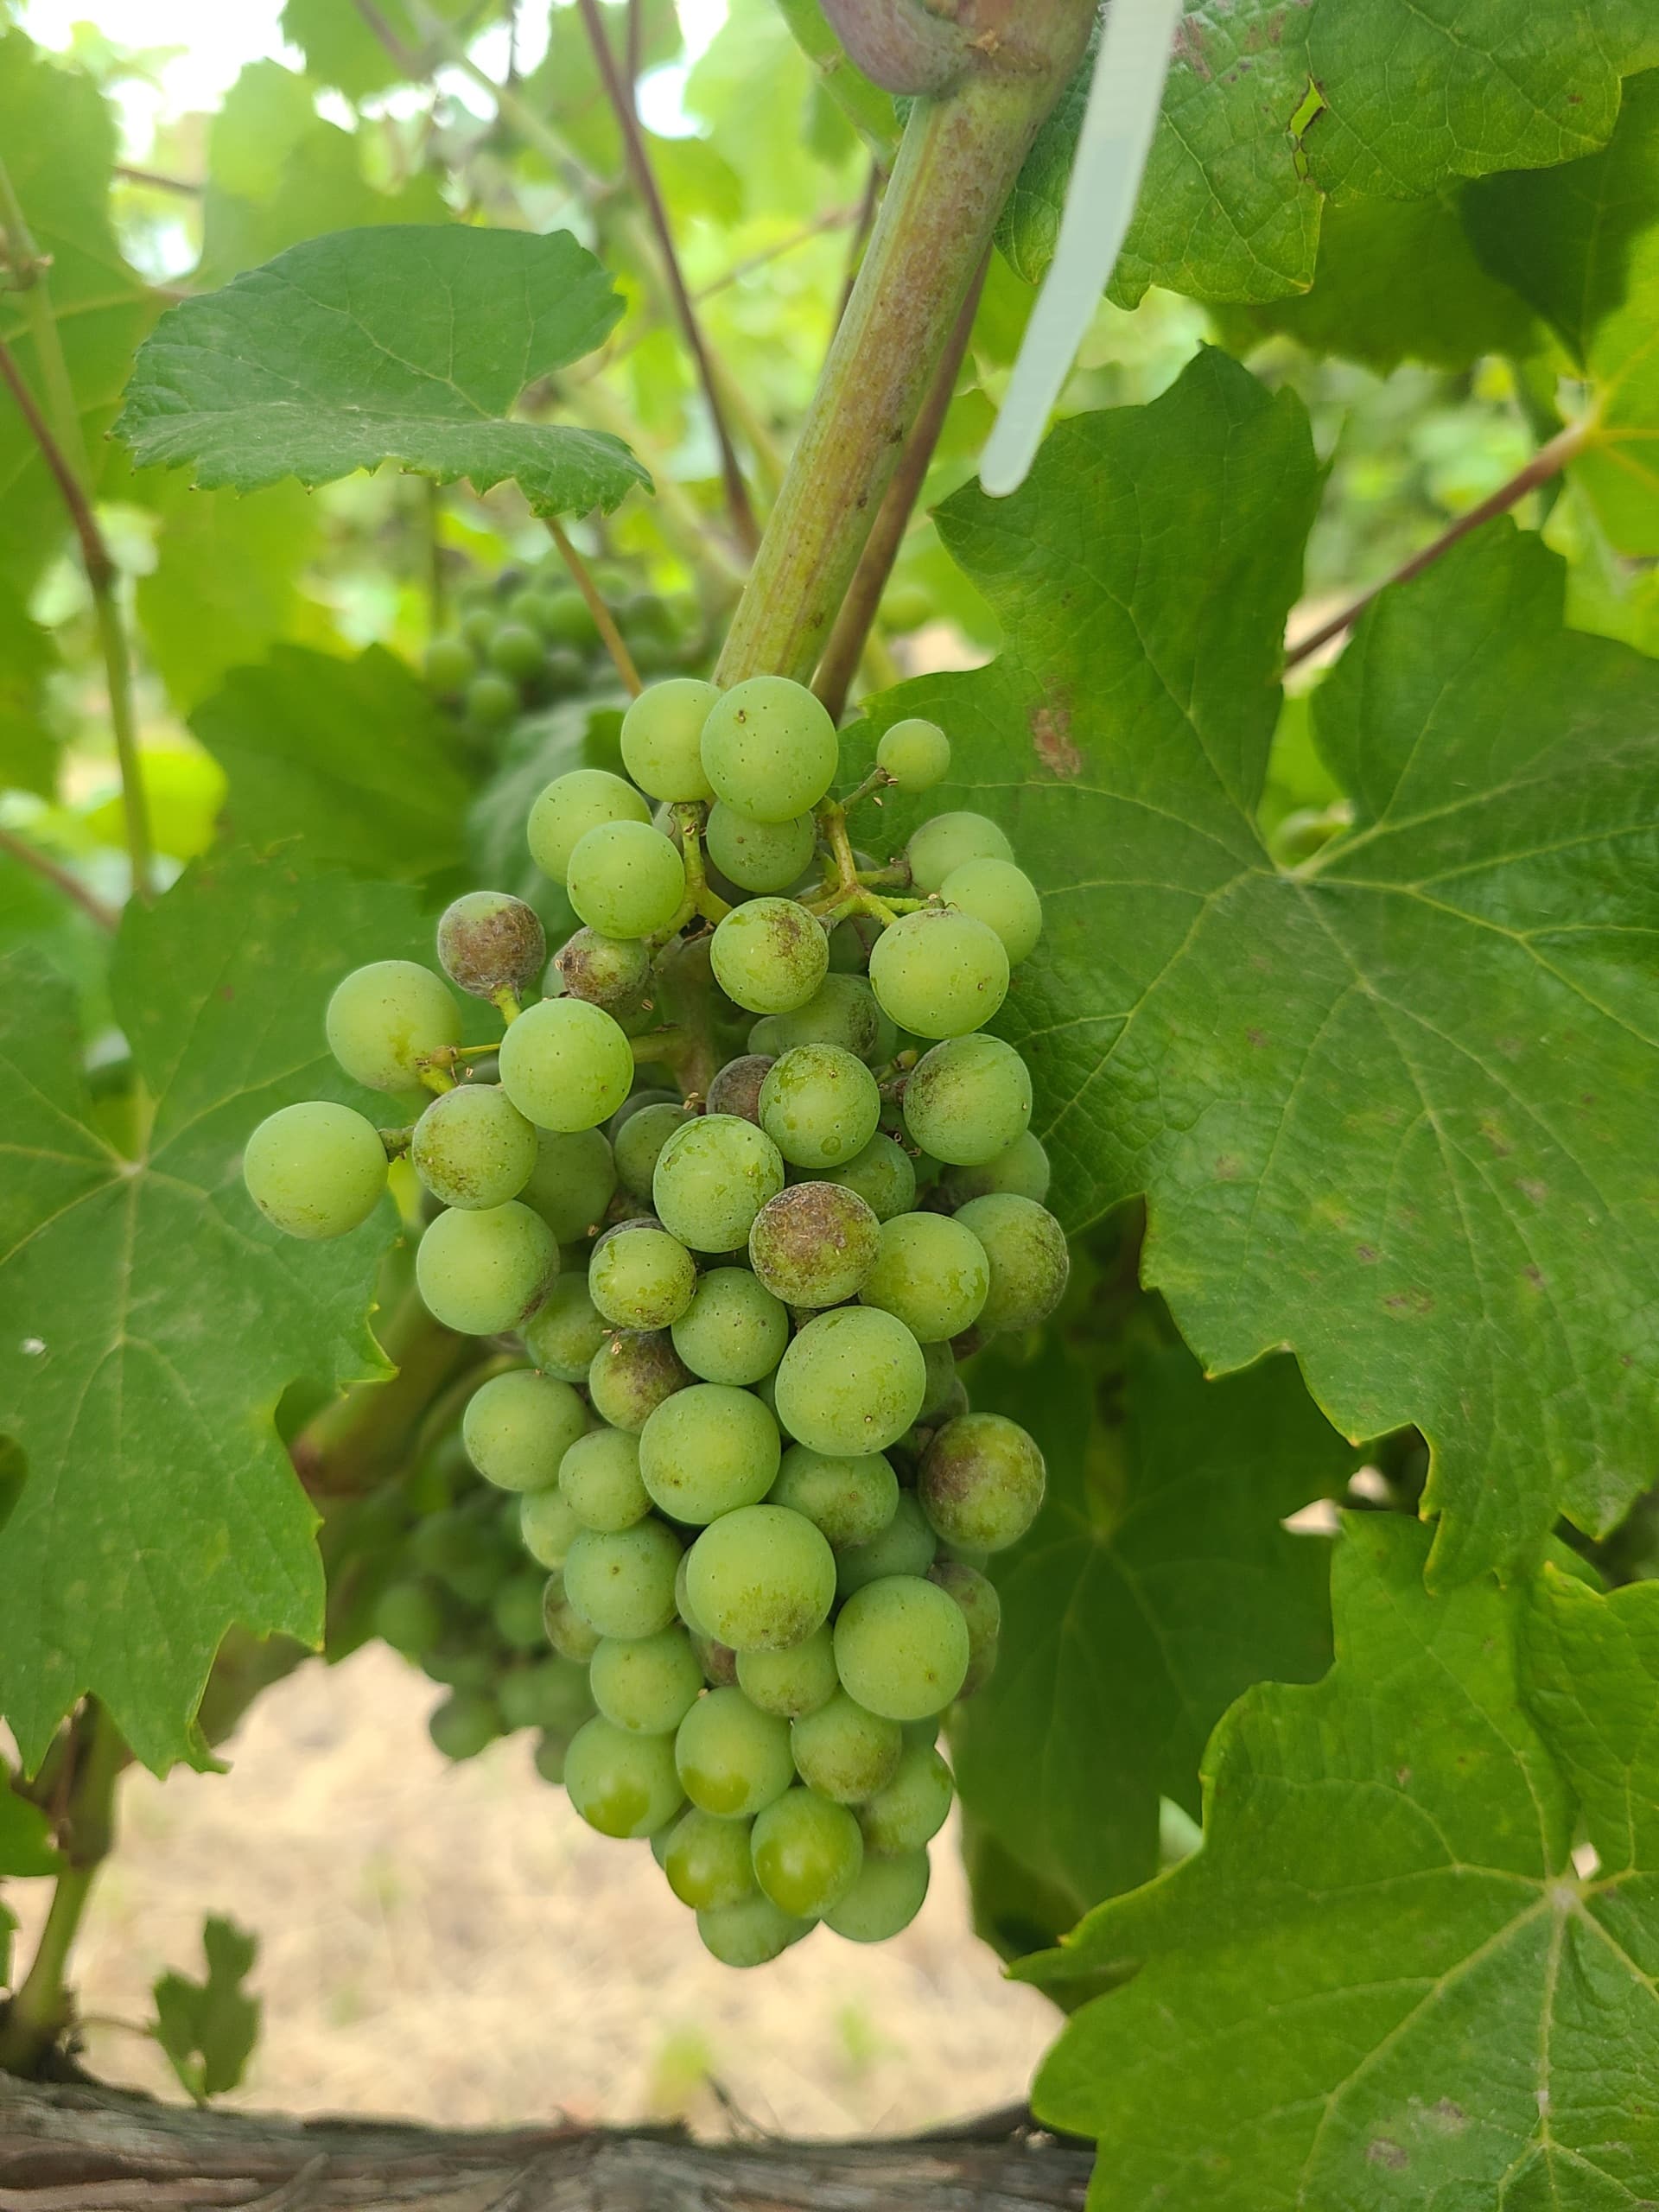 Green wine grapes infected with fungus.